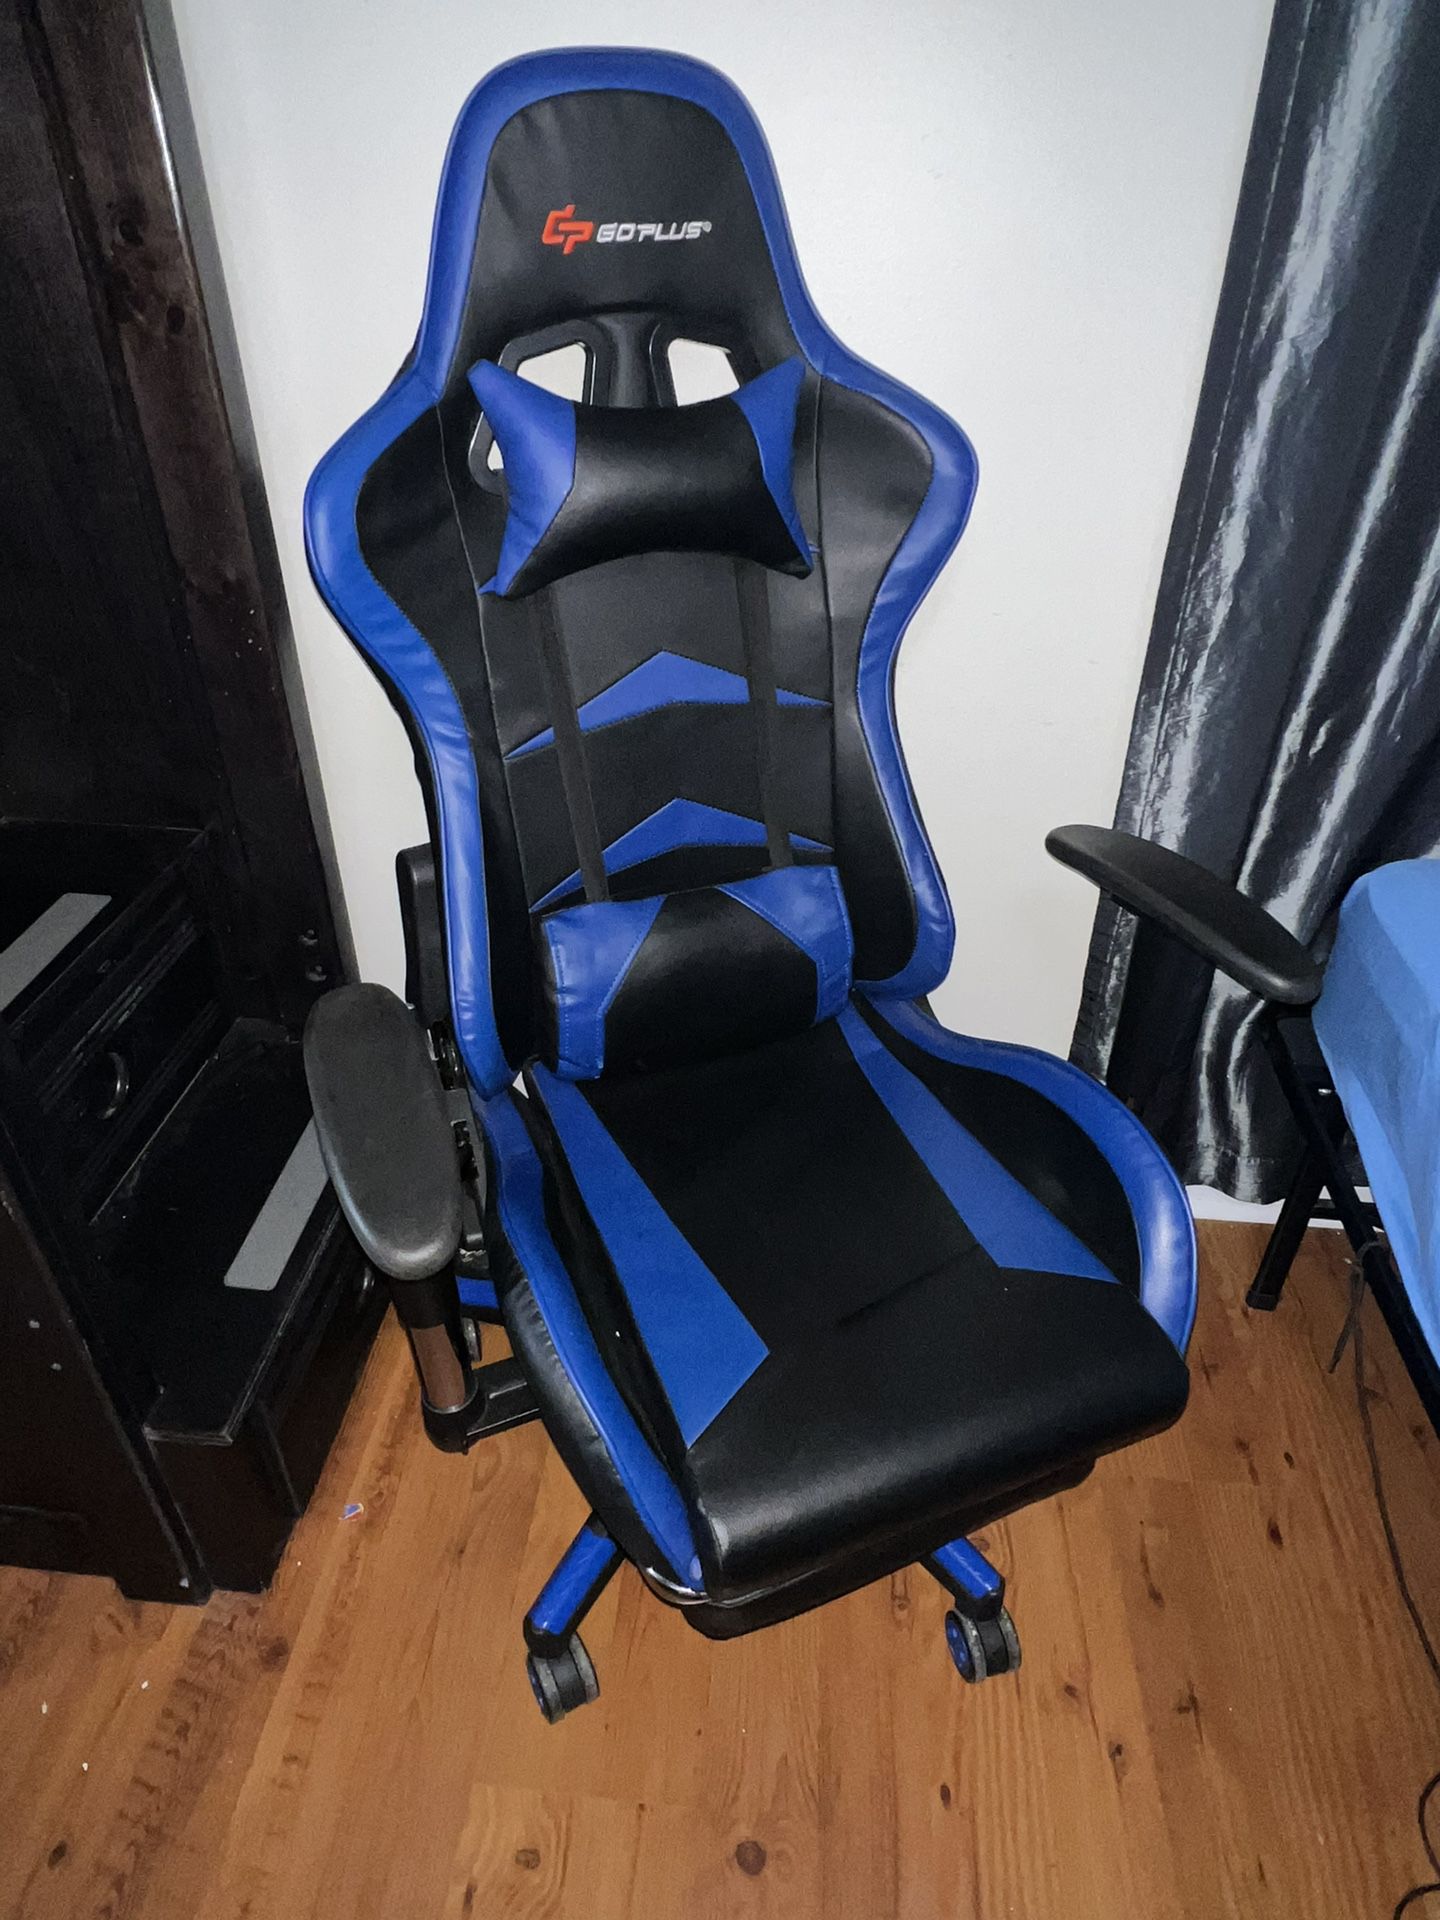 Gaming Chair / Computer chair